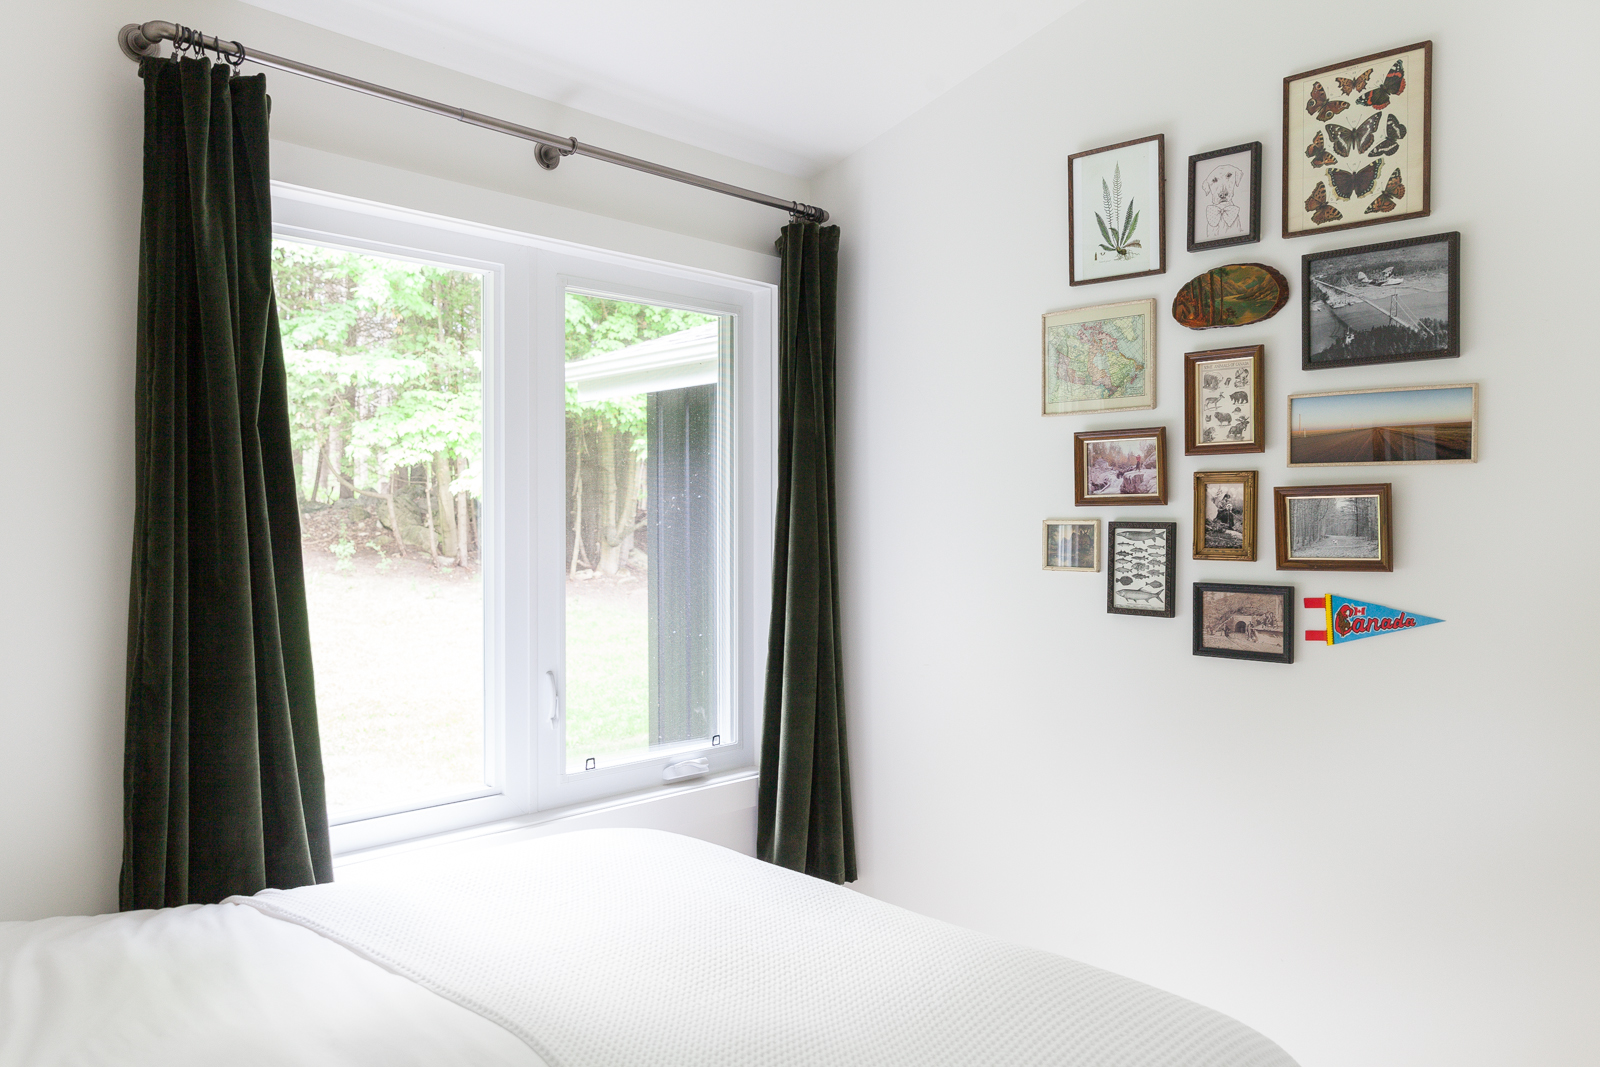 A small gallery wall in a bedroom featuring both family photos and vintage images